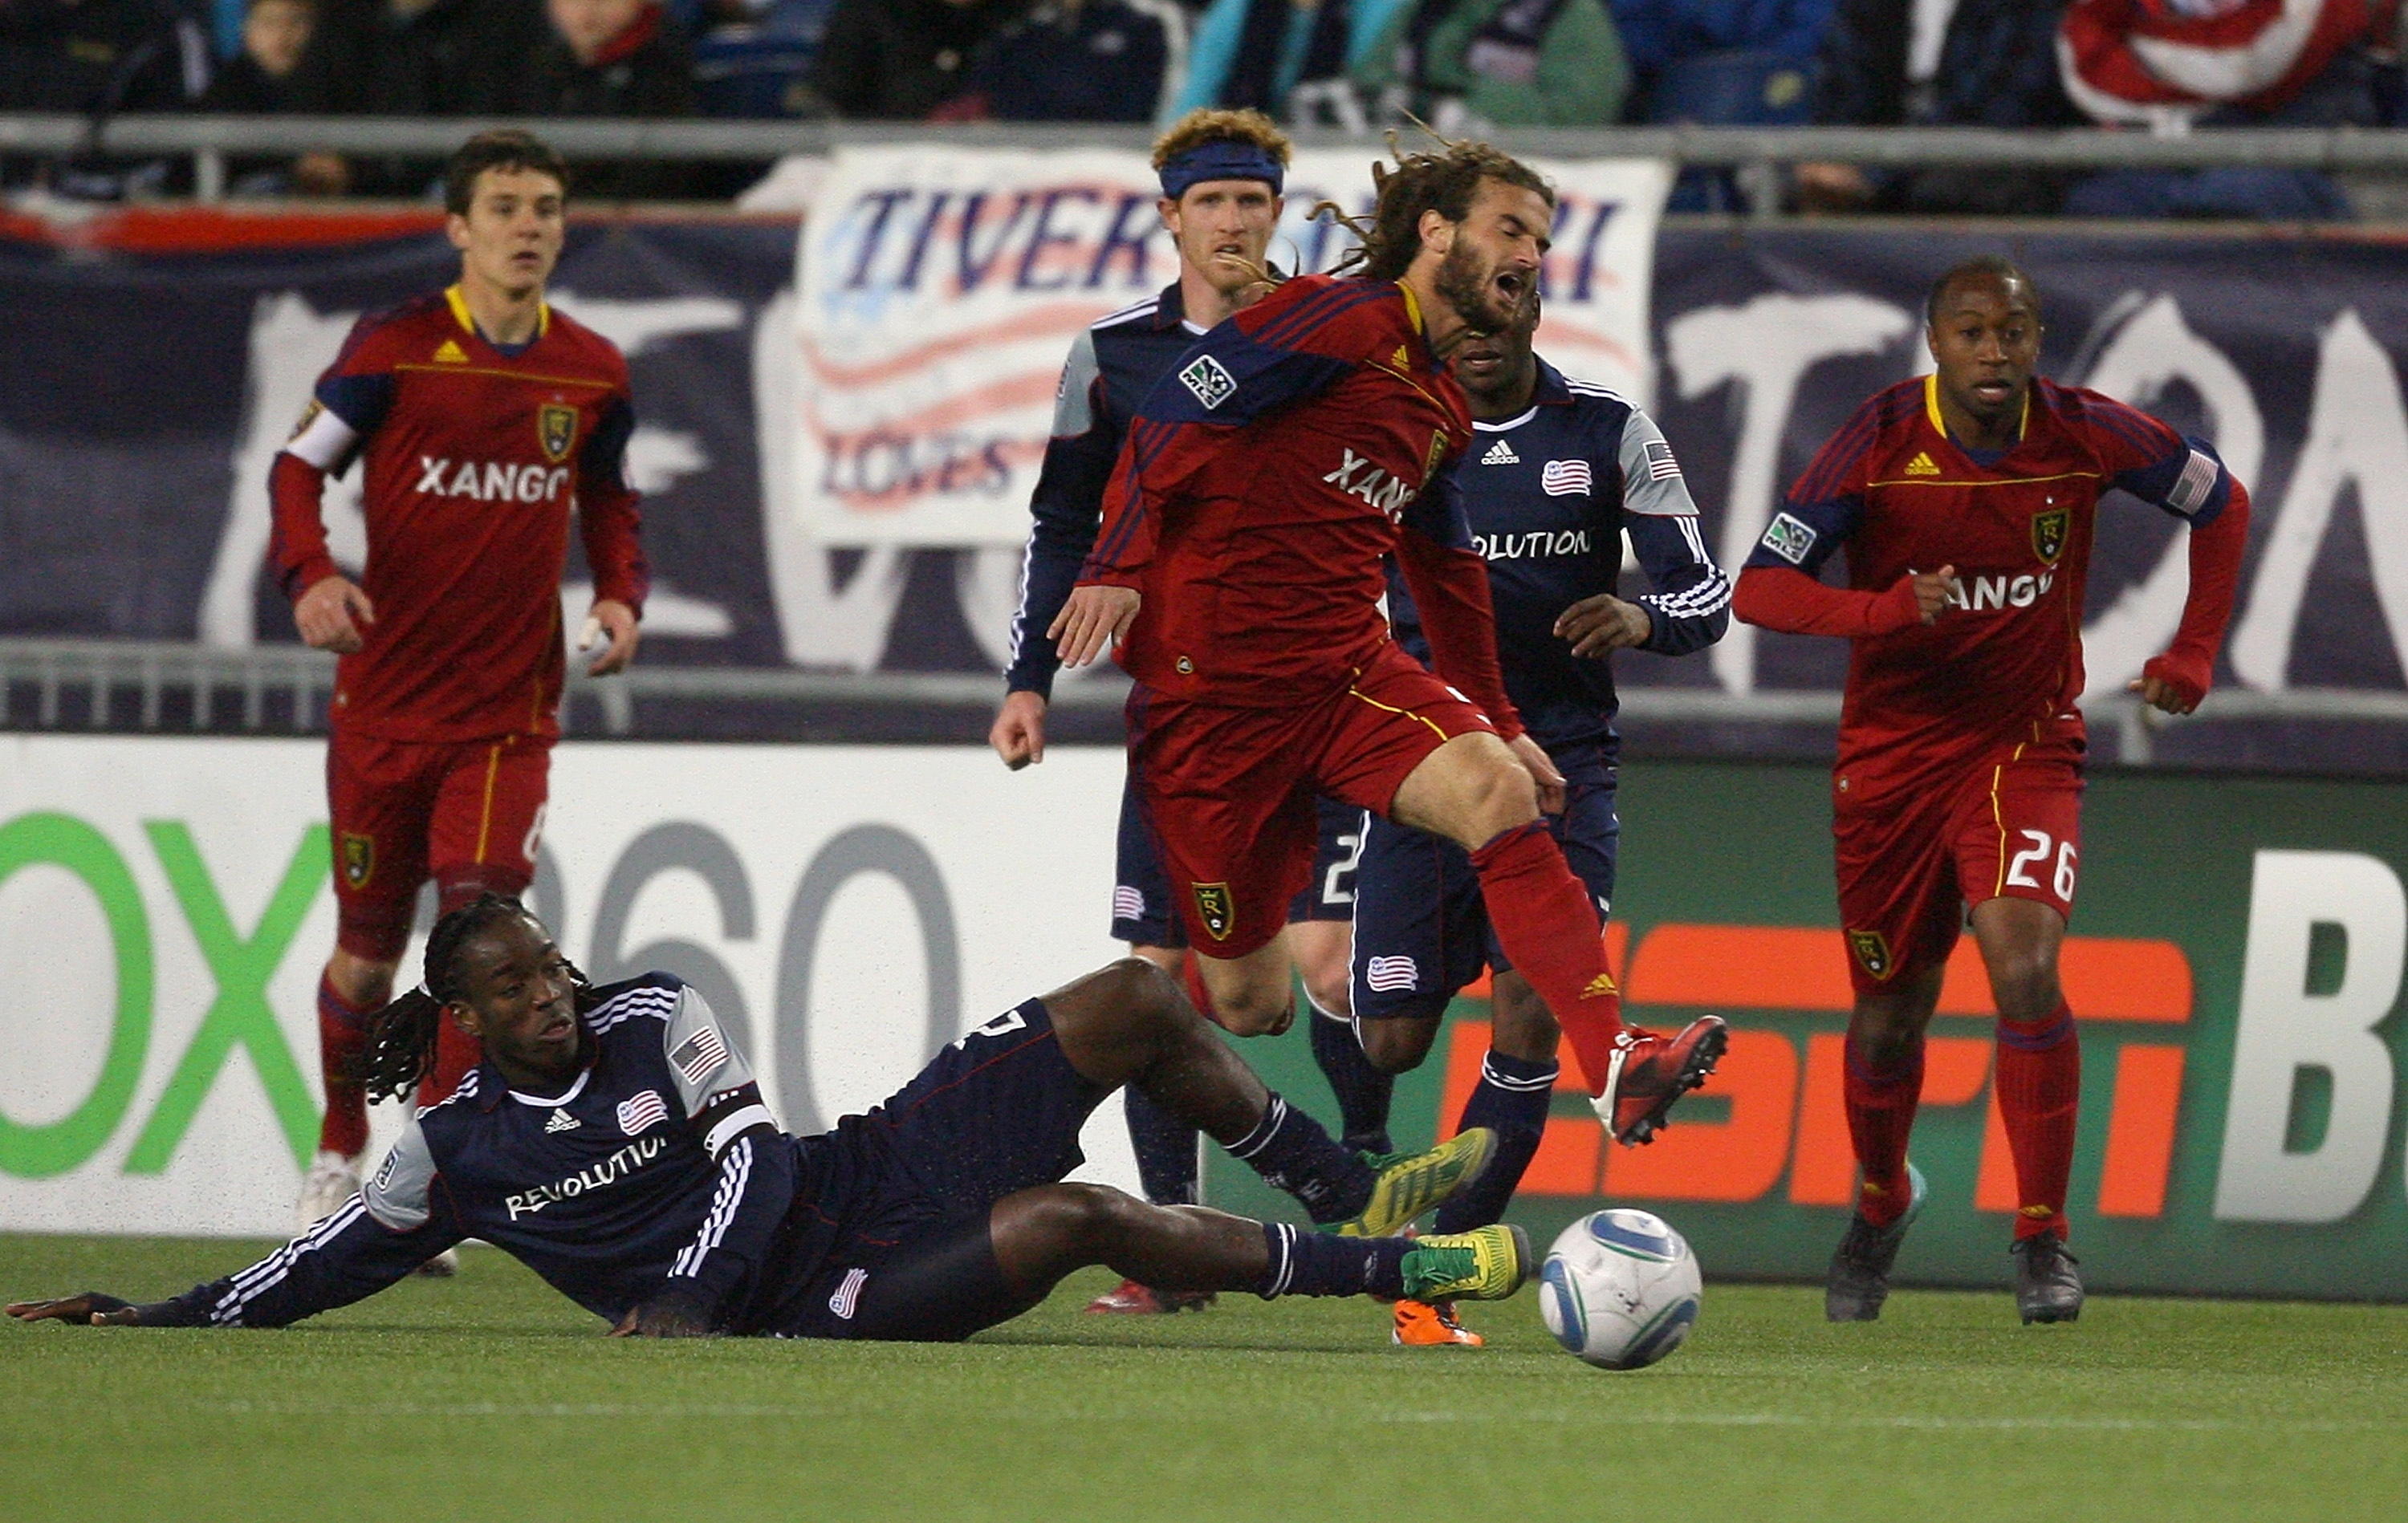 FOXBORO, MA - APRIL 9:  Sharlie Joseph #21 of the New England Revolution trips is entangled with Kyle Beckerman #5 of Real Salt Lake at Gillette Stadium April 9, 2011 in Foxboro, Massachusetts. (Photo by Gail Oskin/Getty Images)